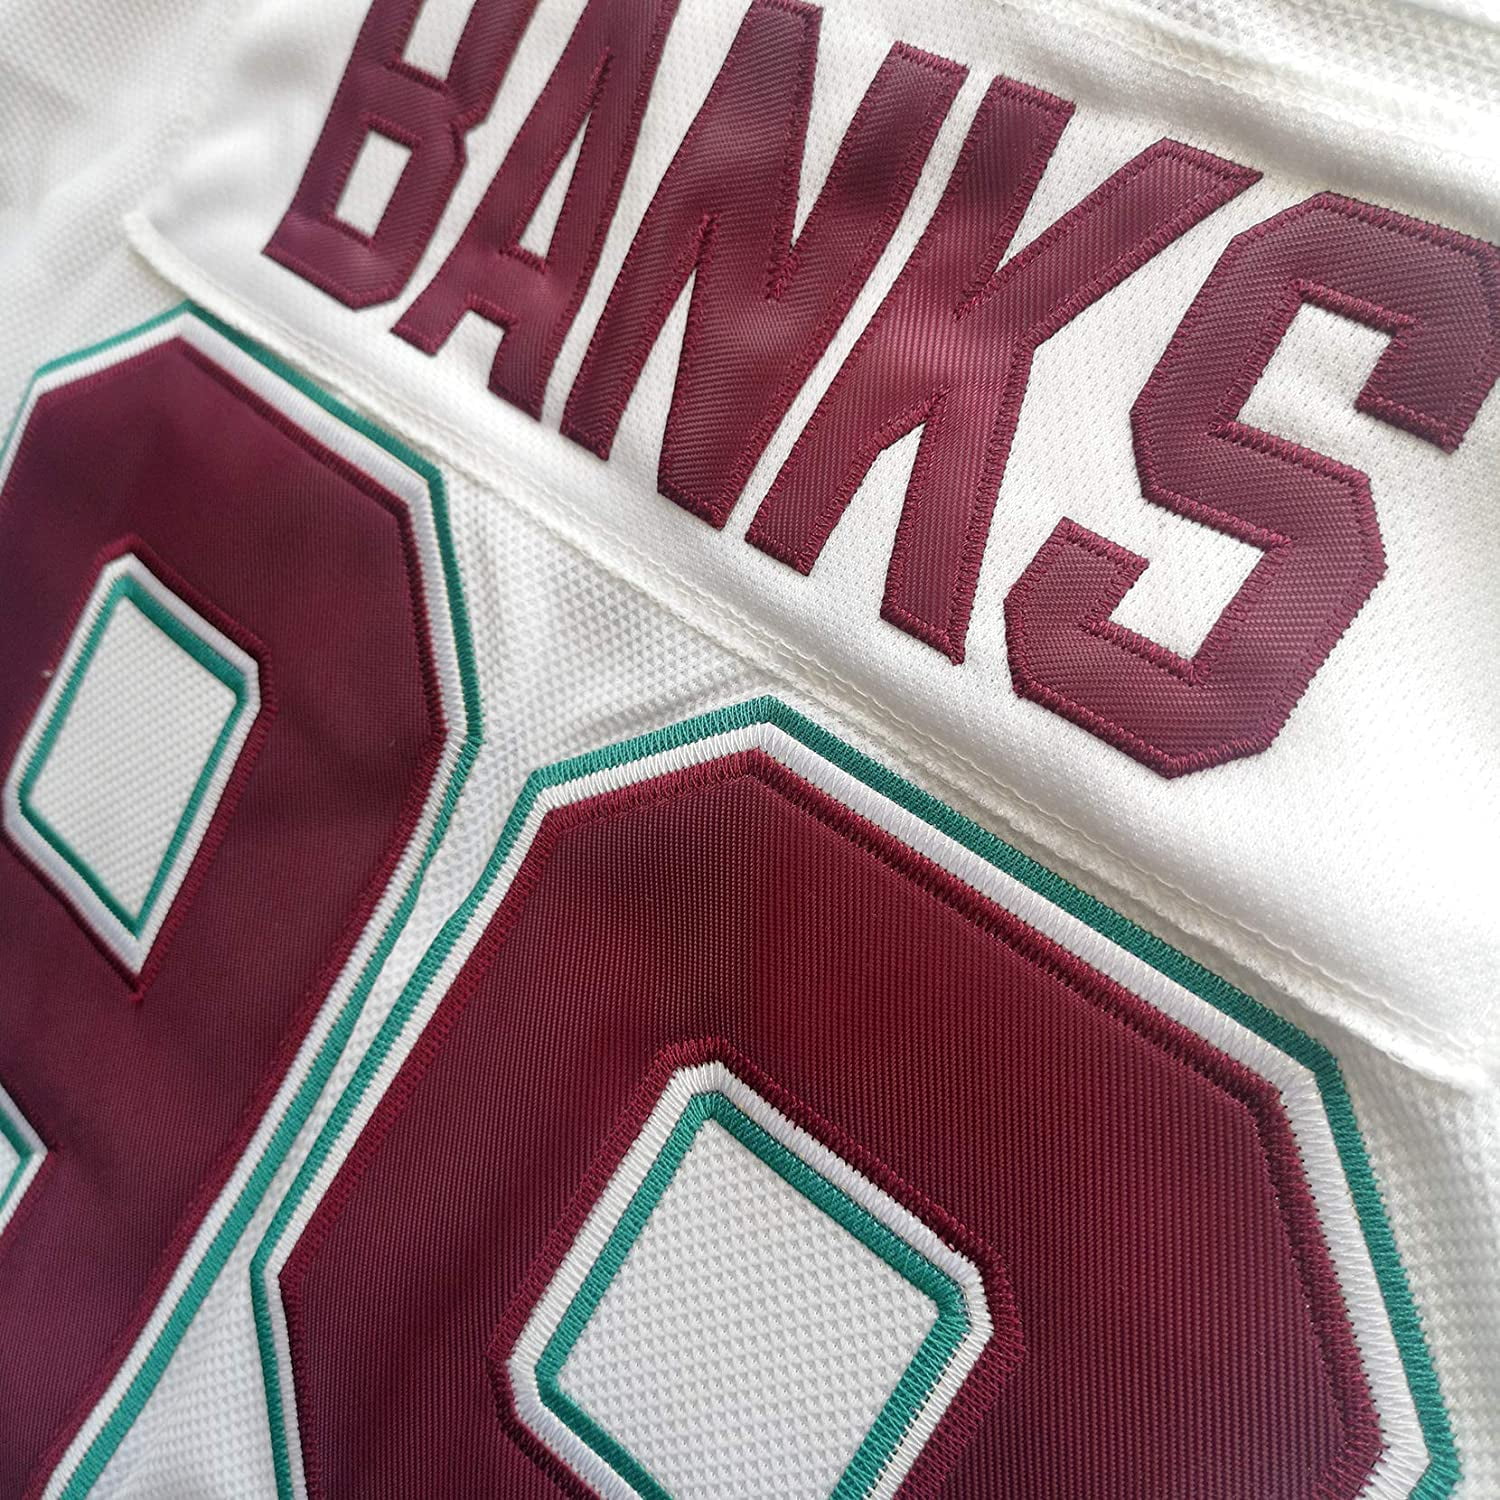  Adam Banks #99 Mighty Ducks Movie Hockey Jersey White Green  Black(Green, Small) : Clothing, Shoes & Jewelry